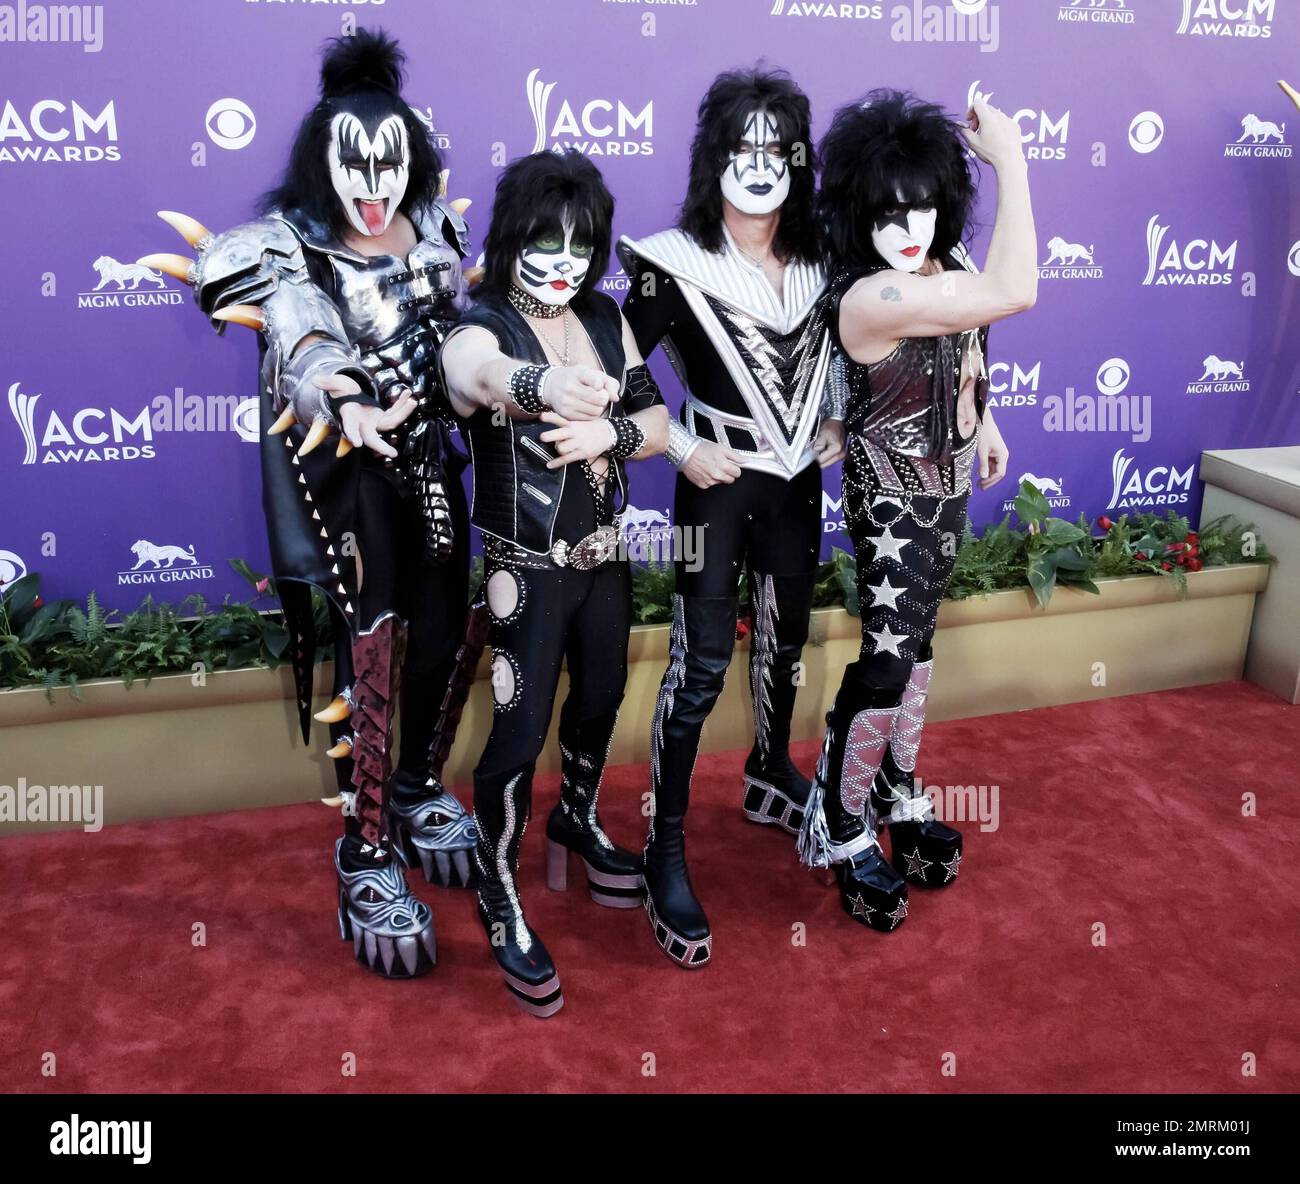 Gene Simmons, Eric Singer, Tommy Thayer and Paul Stanley of the metal band 'Kiss' arrives at the Academy of Country Music Awards held at the MGM Resort & Casino. Las Vegas, NV. 1st April 2012. . Stock Photo